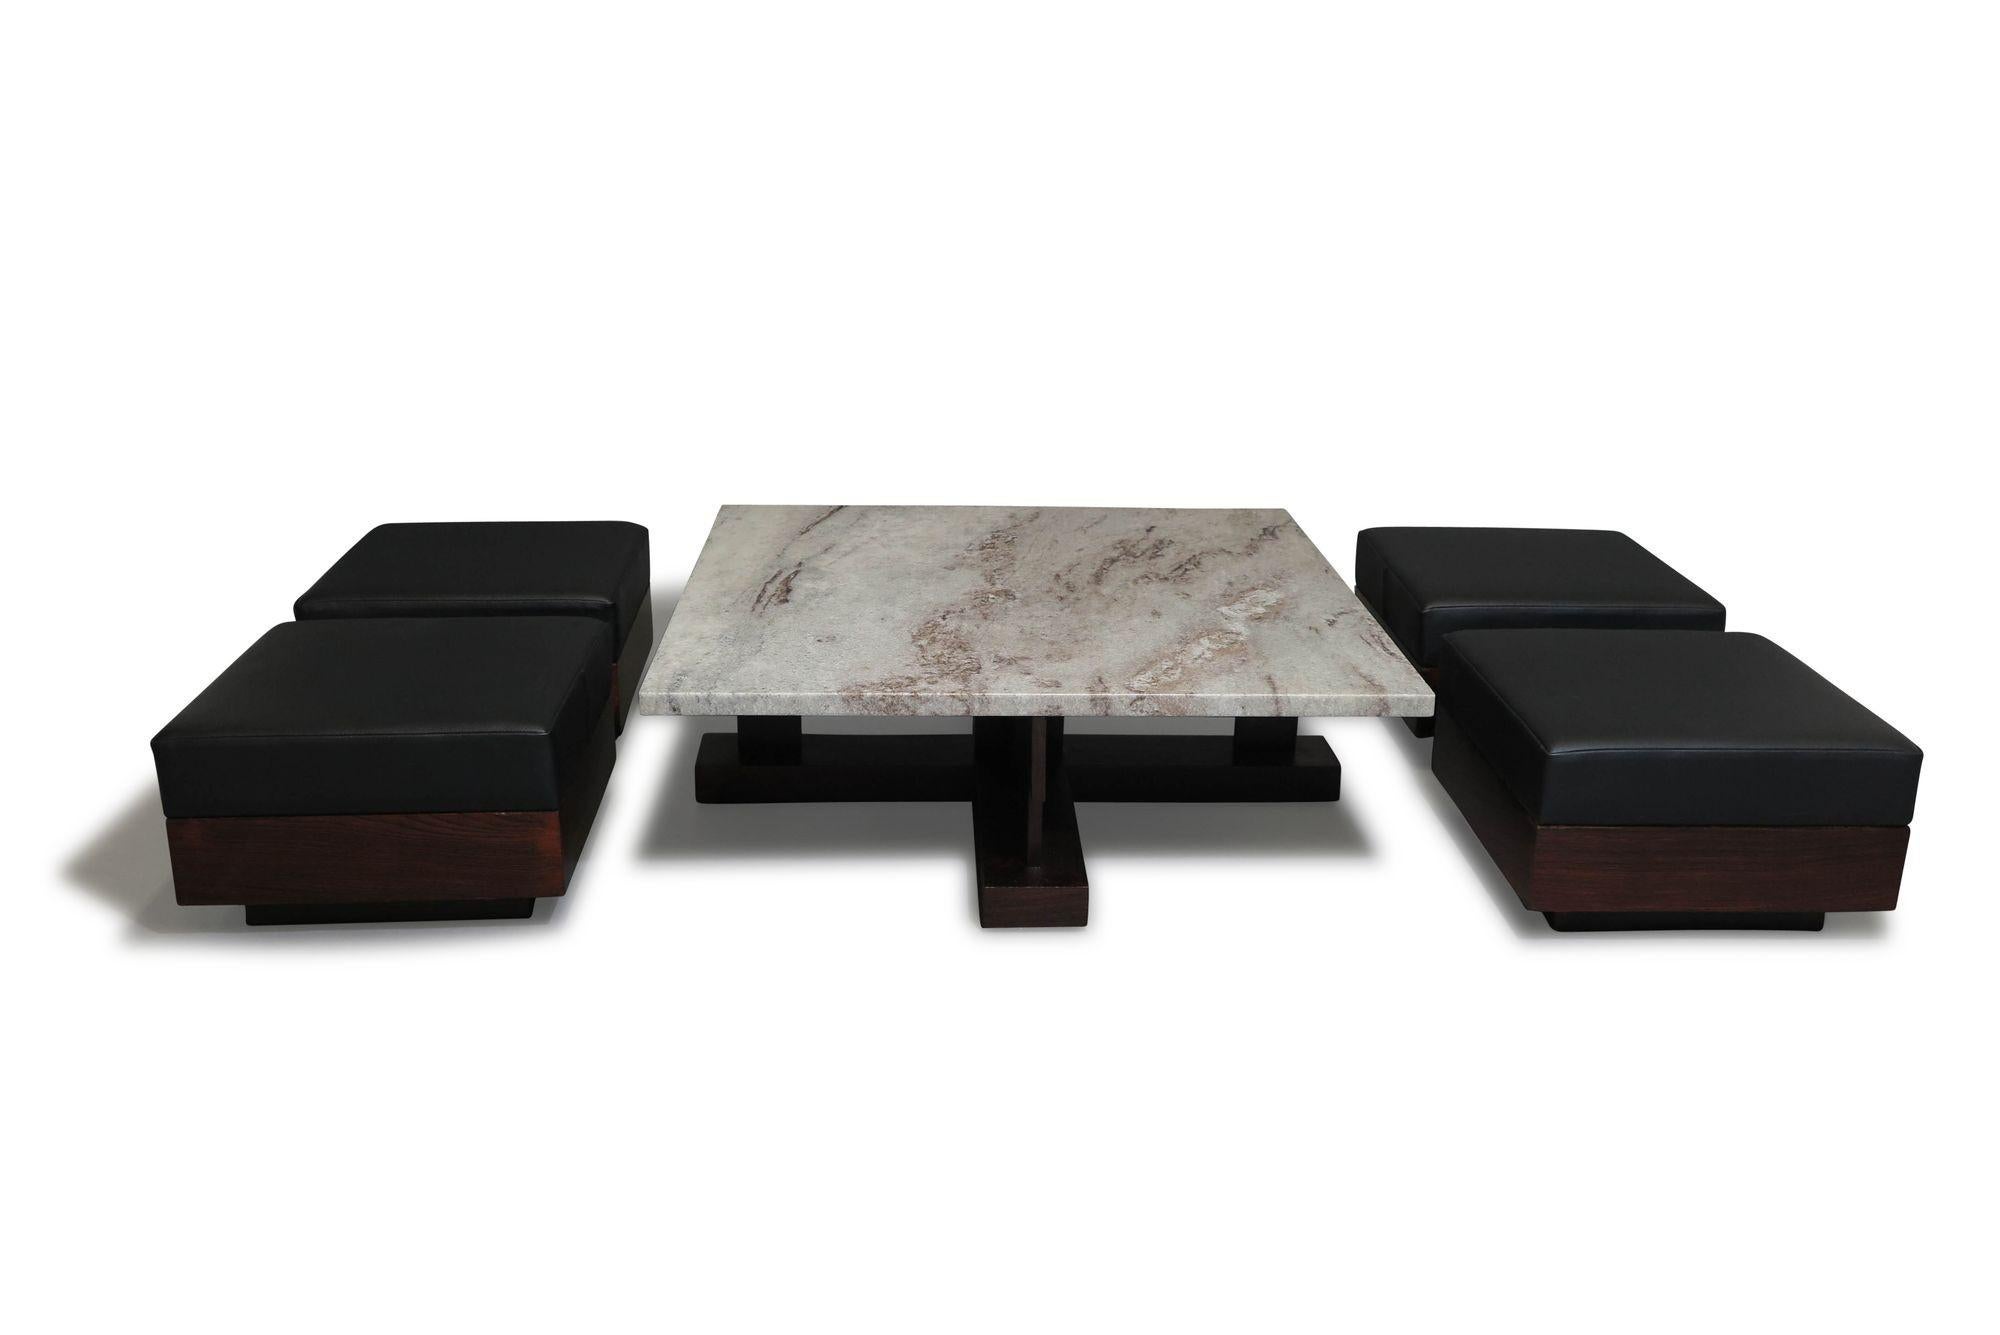 Celina Decorações Brazilian Modern Rosewood Coffee Table With Ottoman Benches For Sale 3